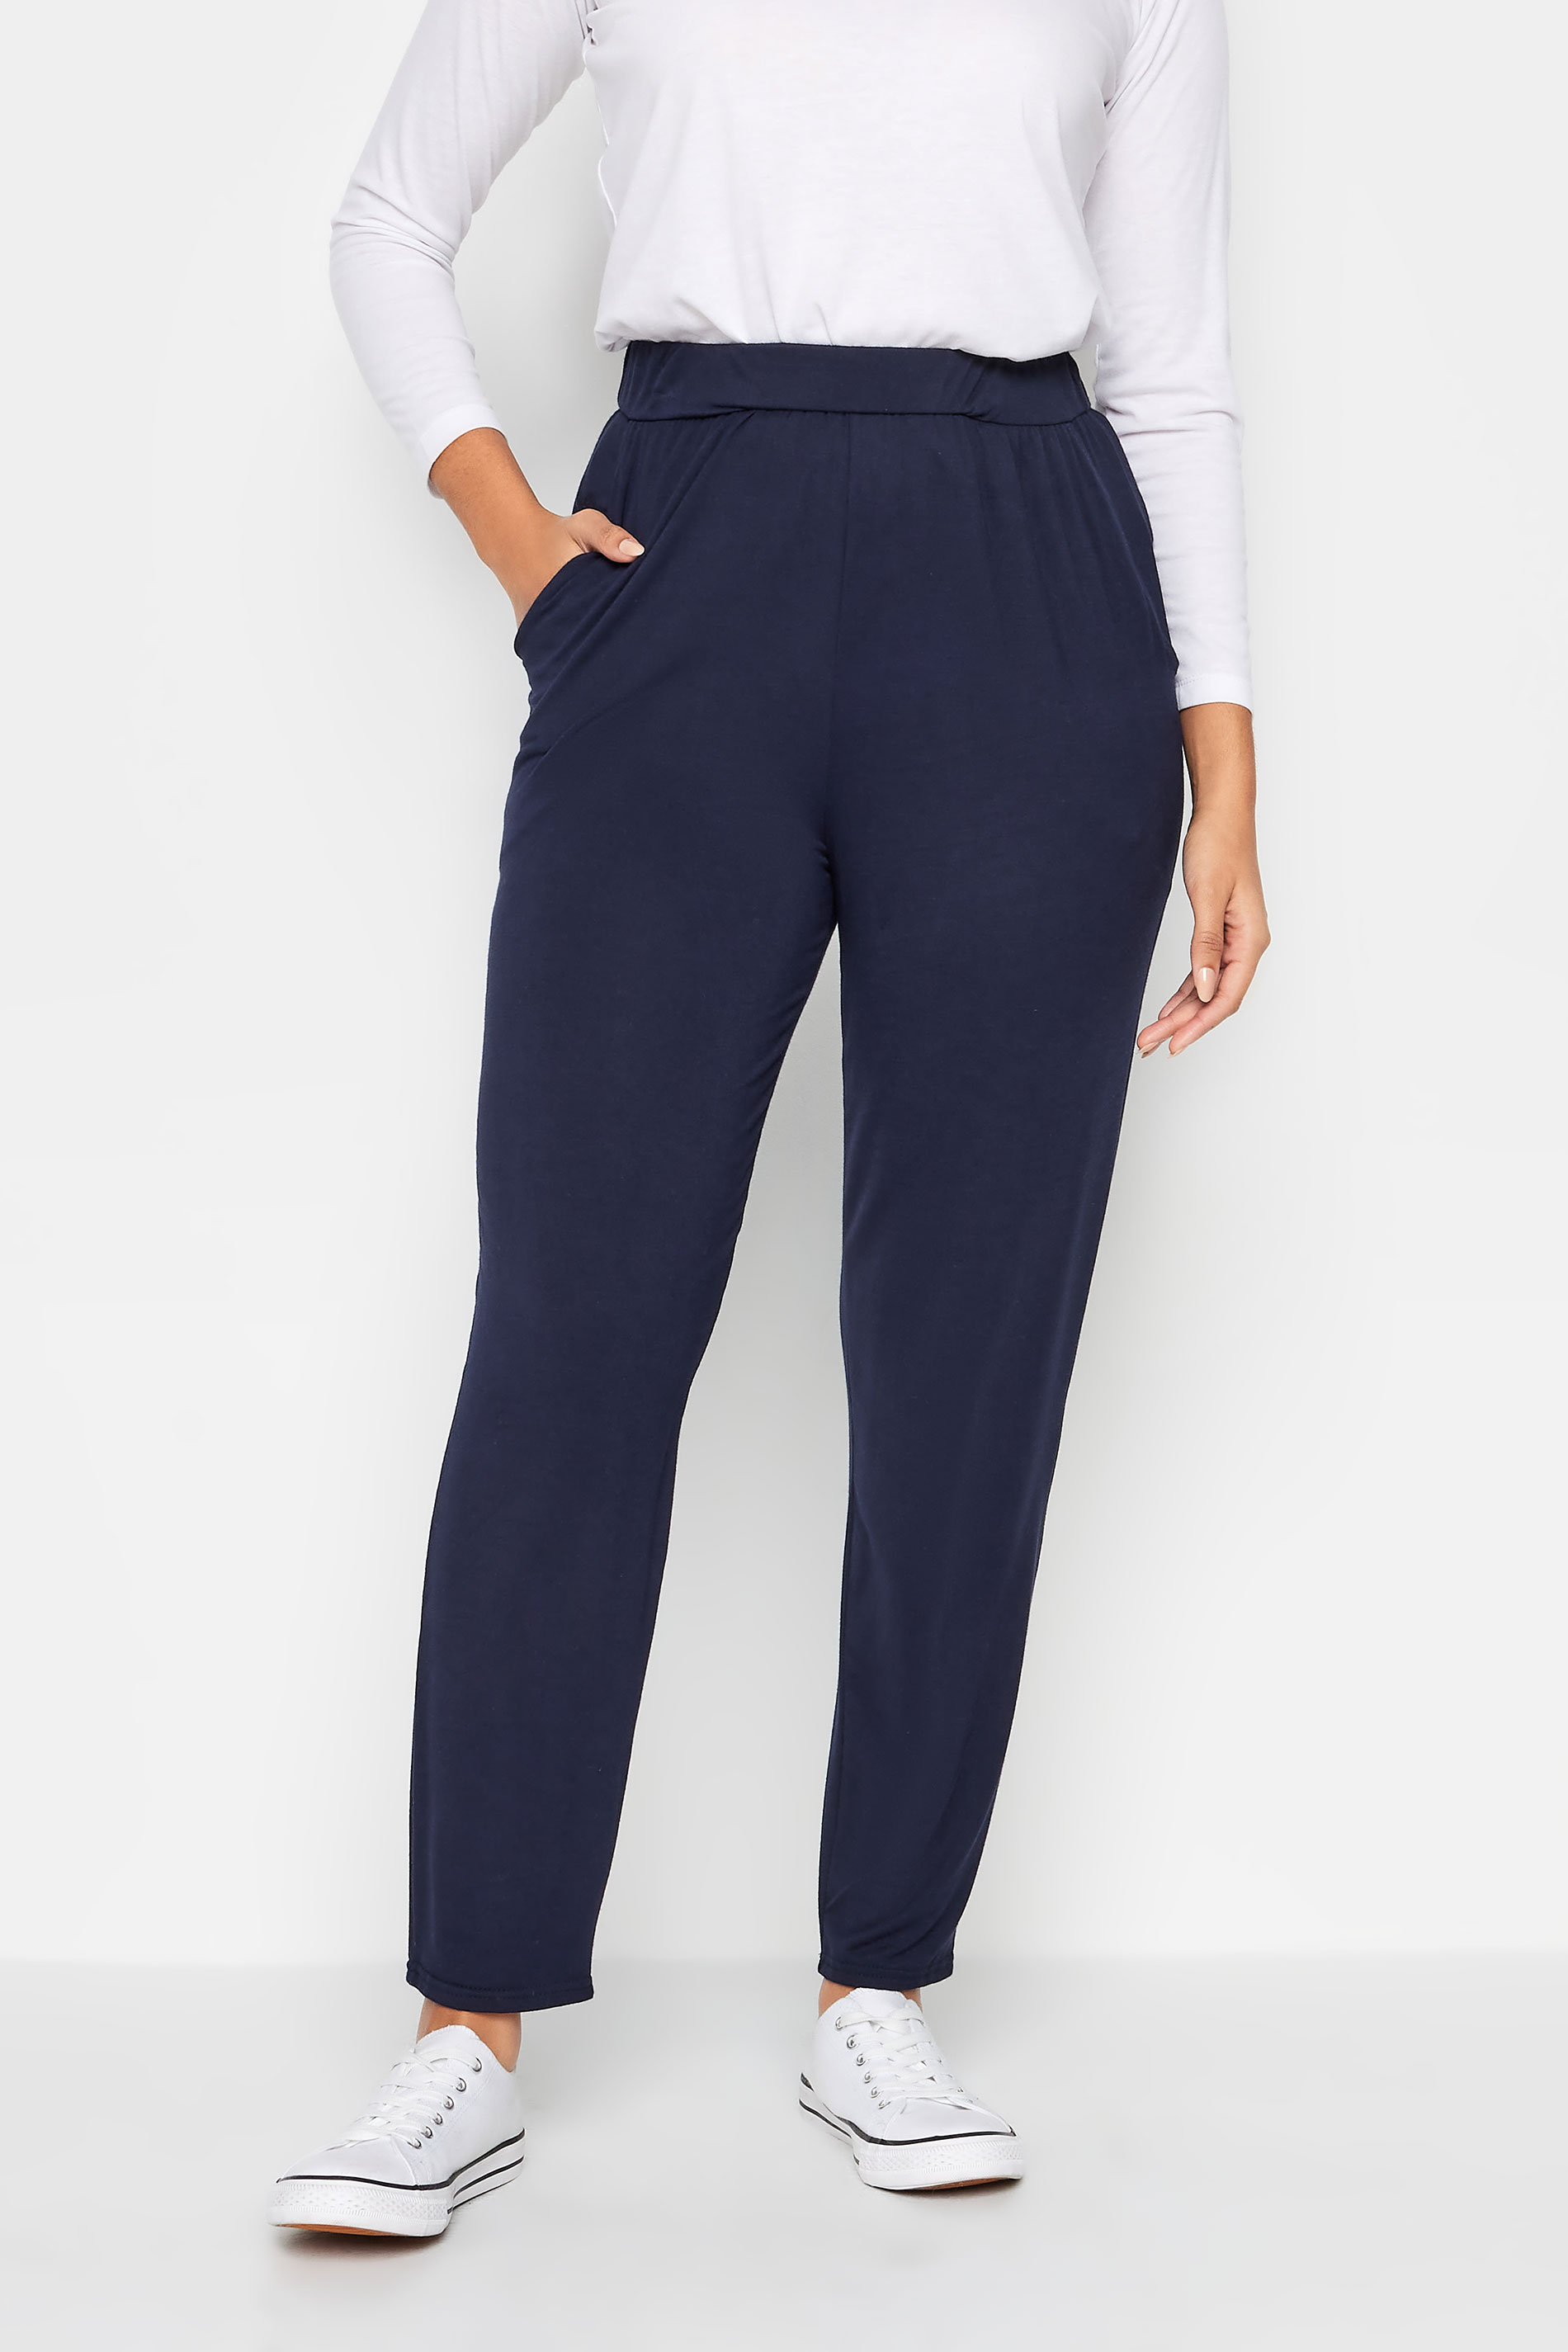 M&Co Navy Blue Hareem Jersey Trousers | M&Co 1